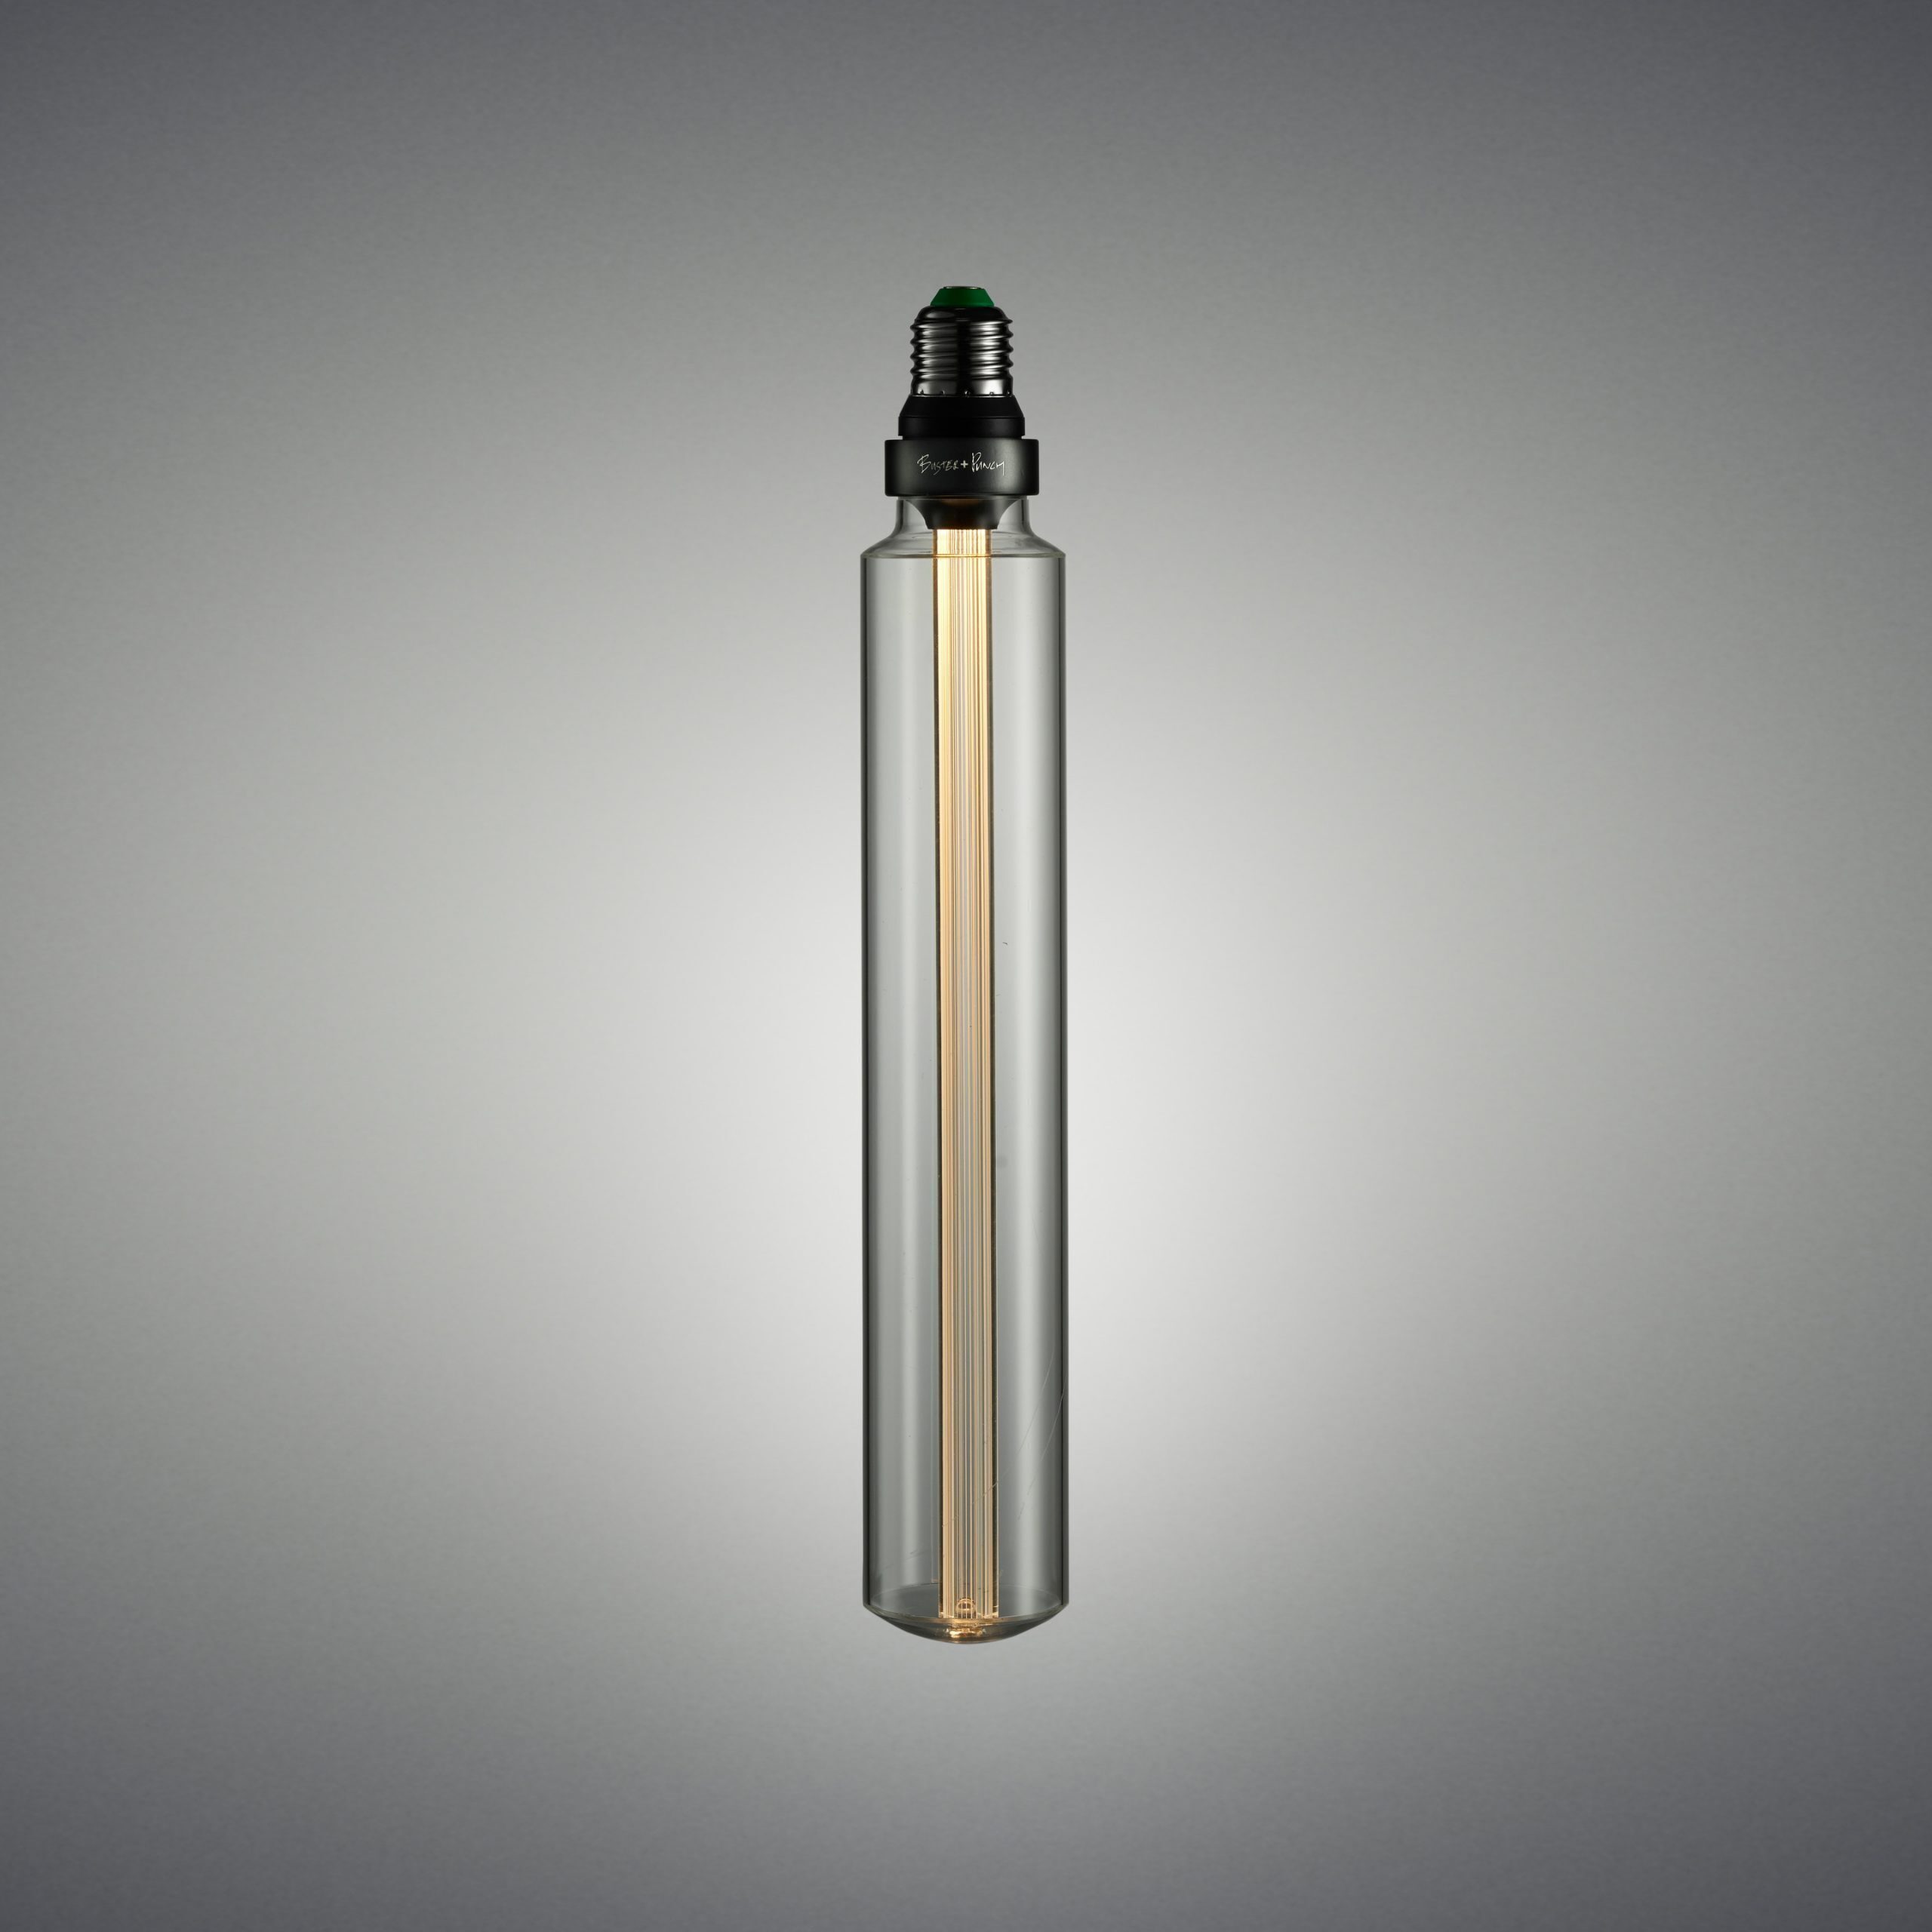 BUSTER BULB / TUBE / NON-DIMMABLE / POLYCARBONATE